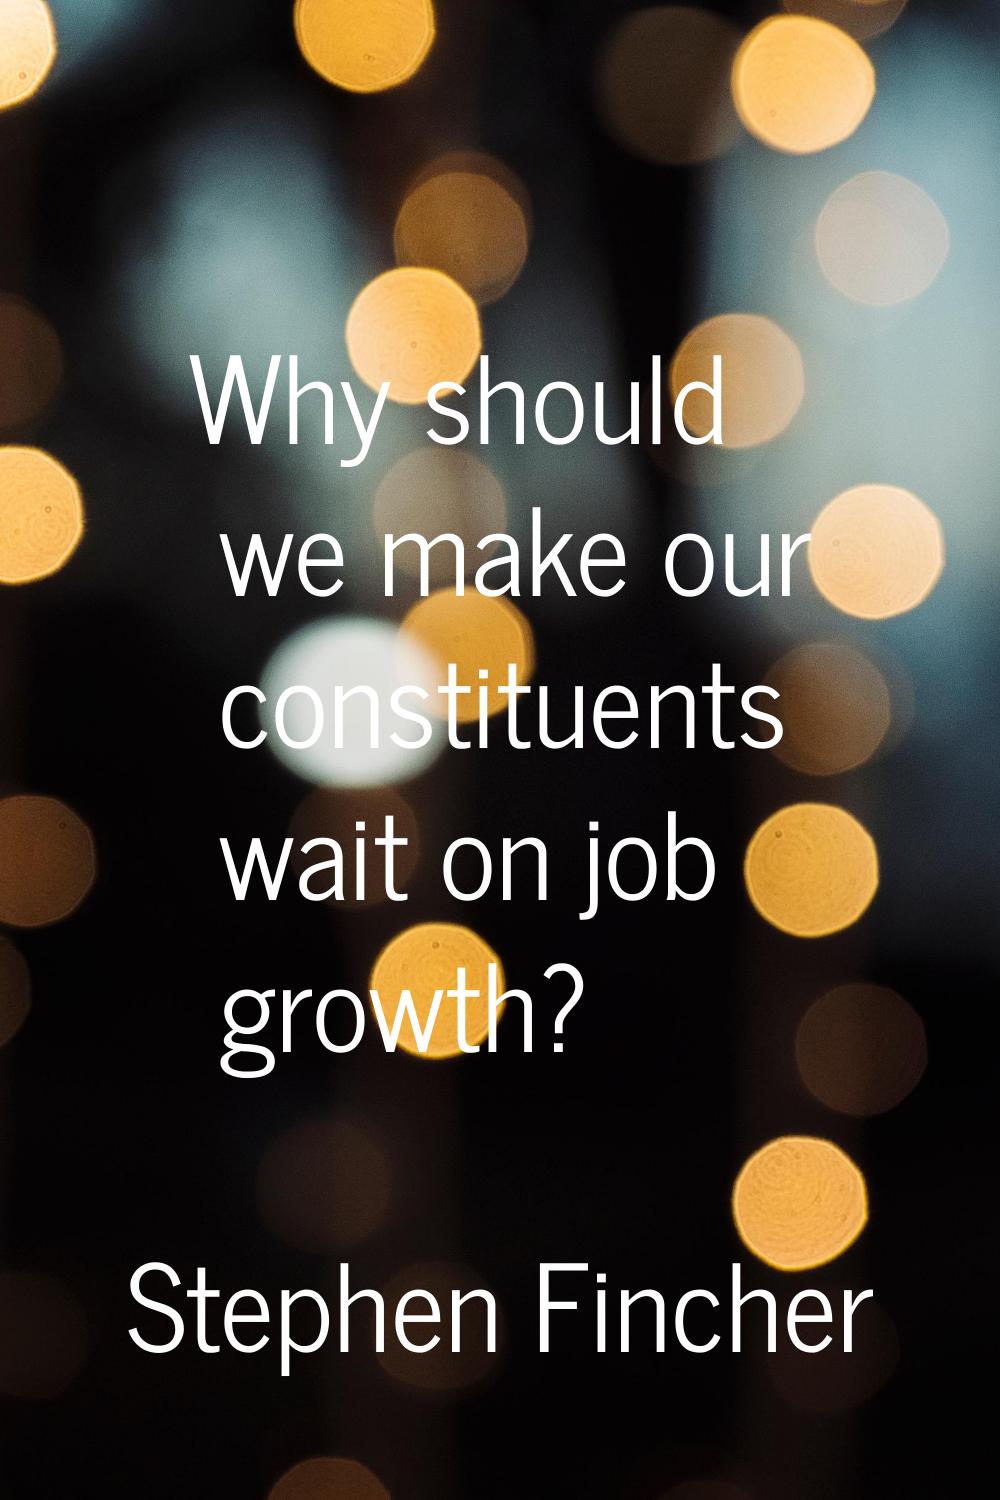 Why should we make our constituents wait on job growth?